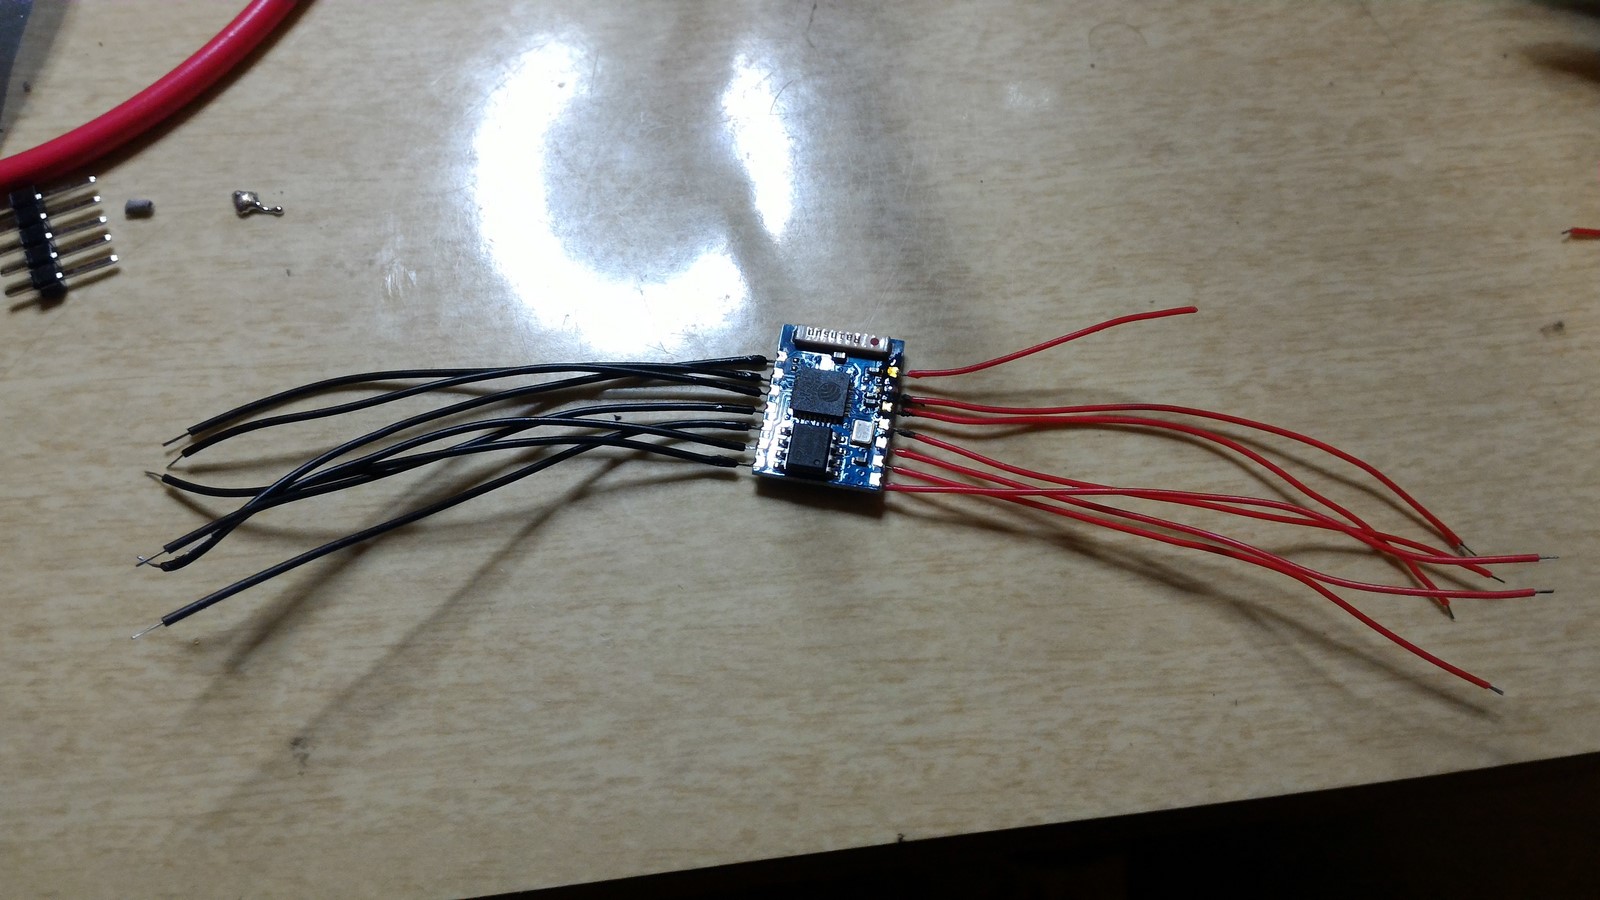 ESP8266-03 wires connected